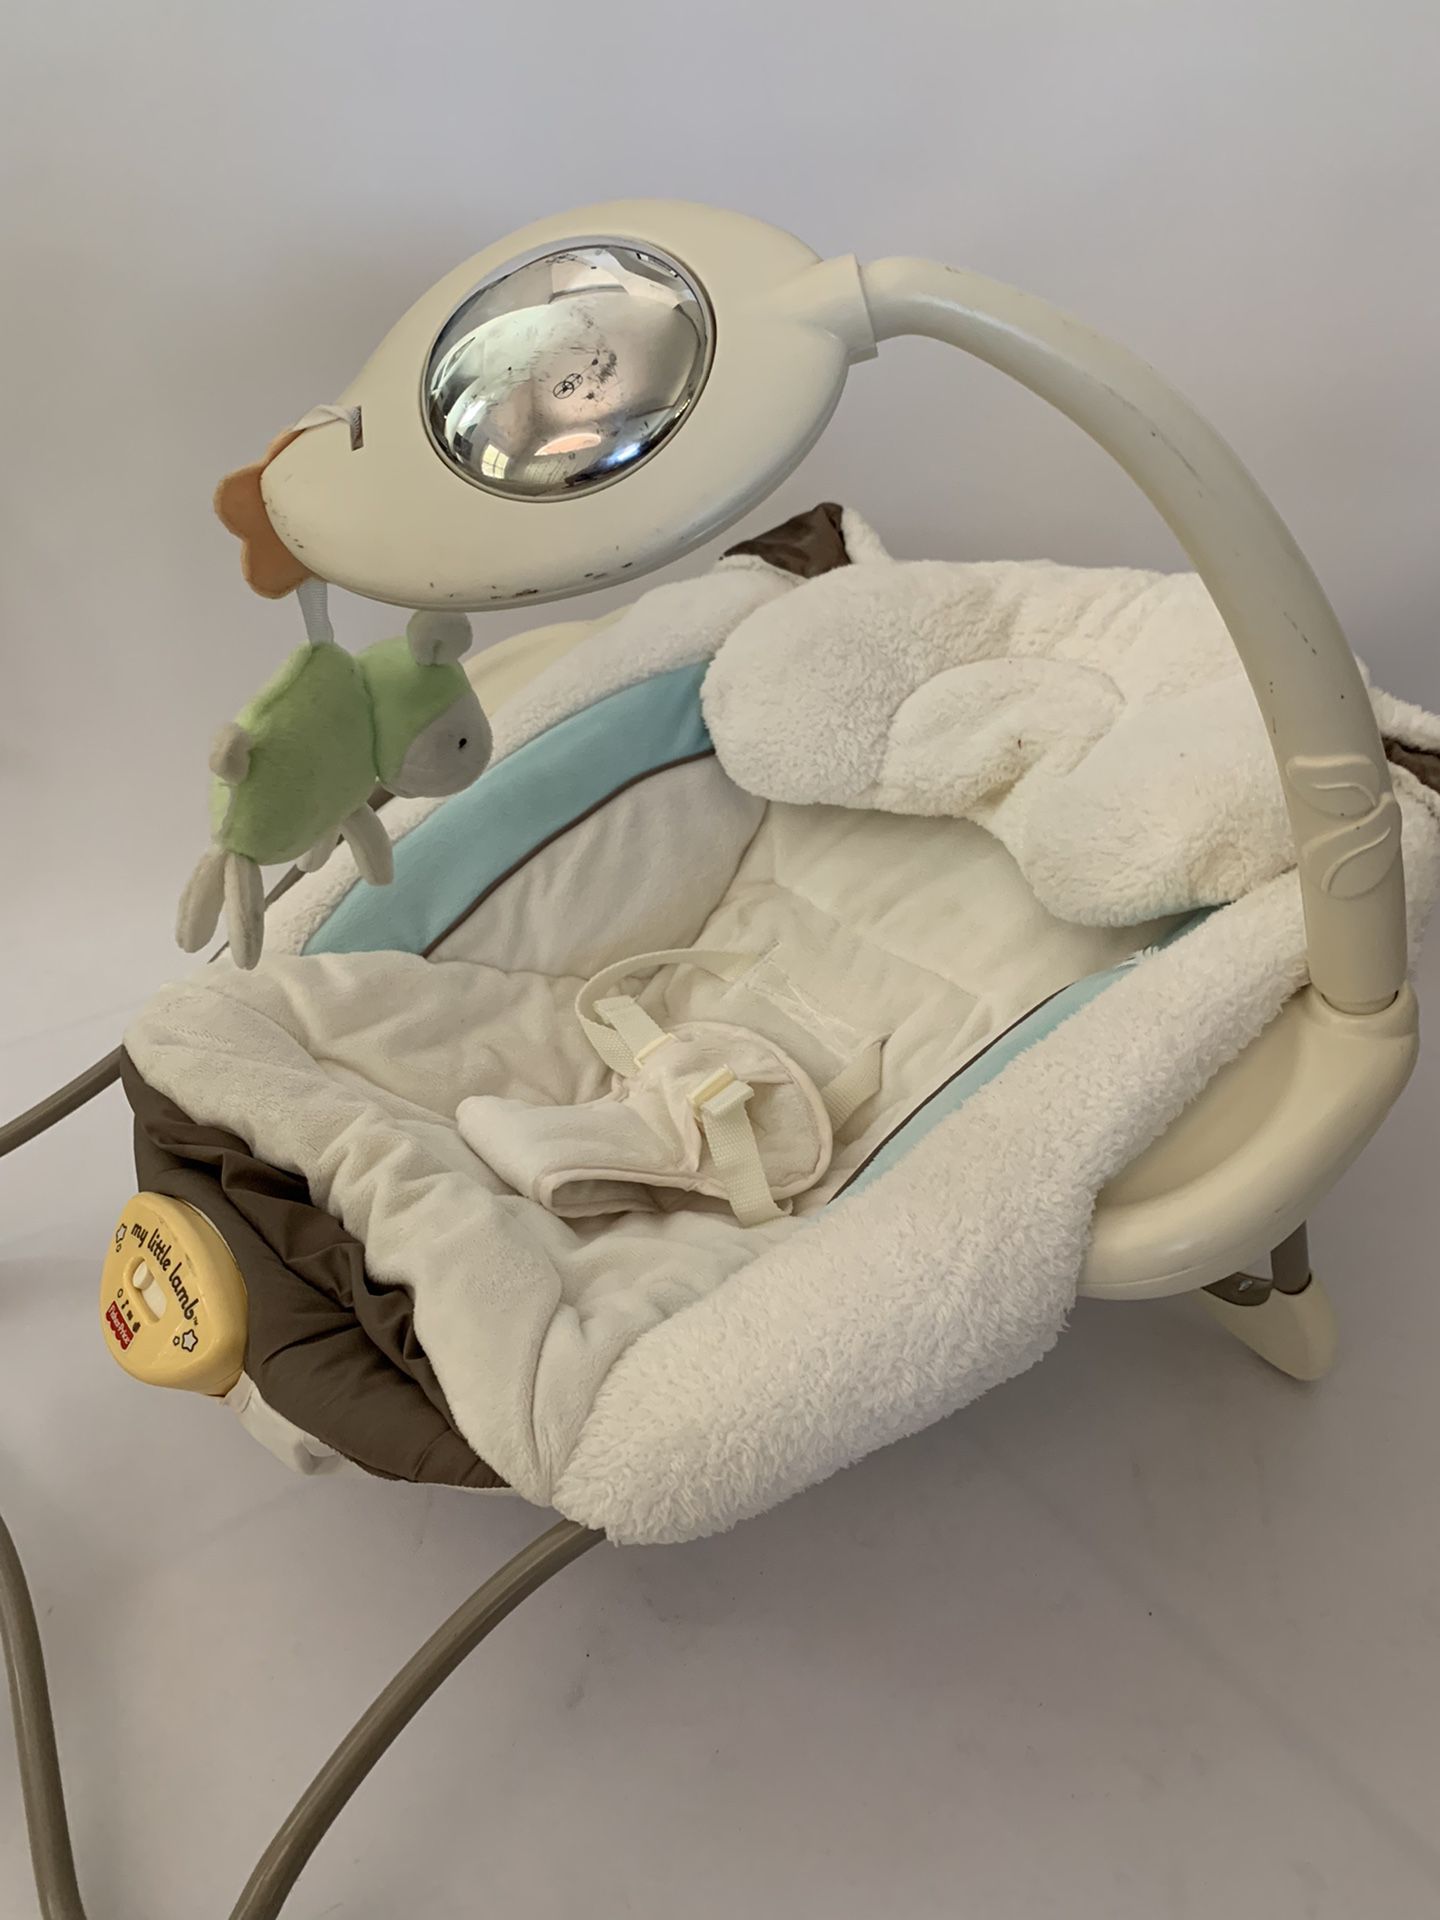 Fisher-Price My Little Lamb Infant Bouncer